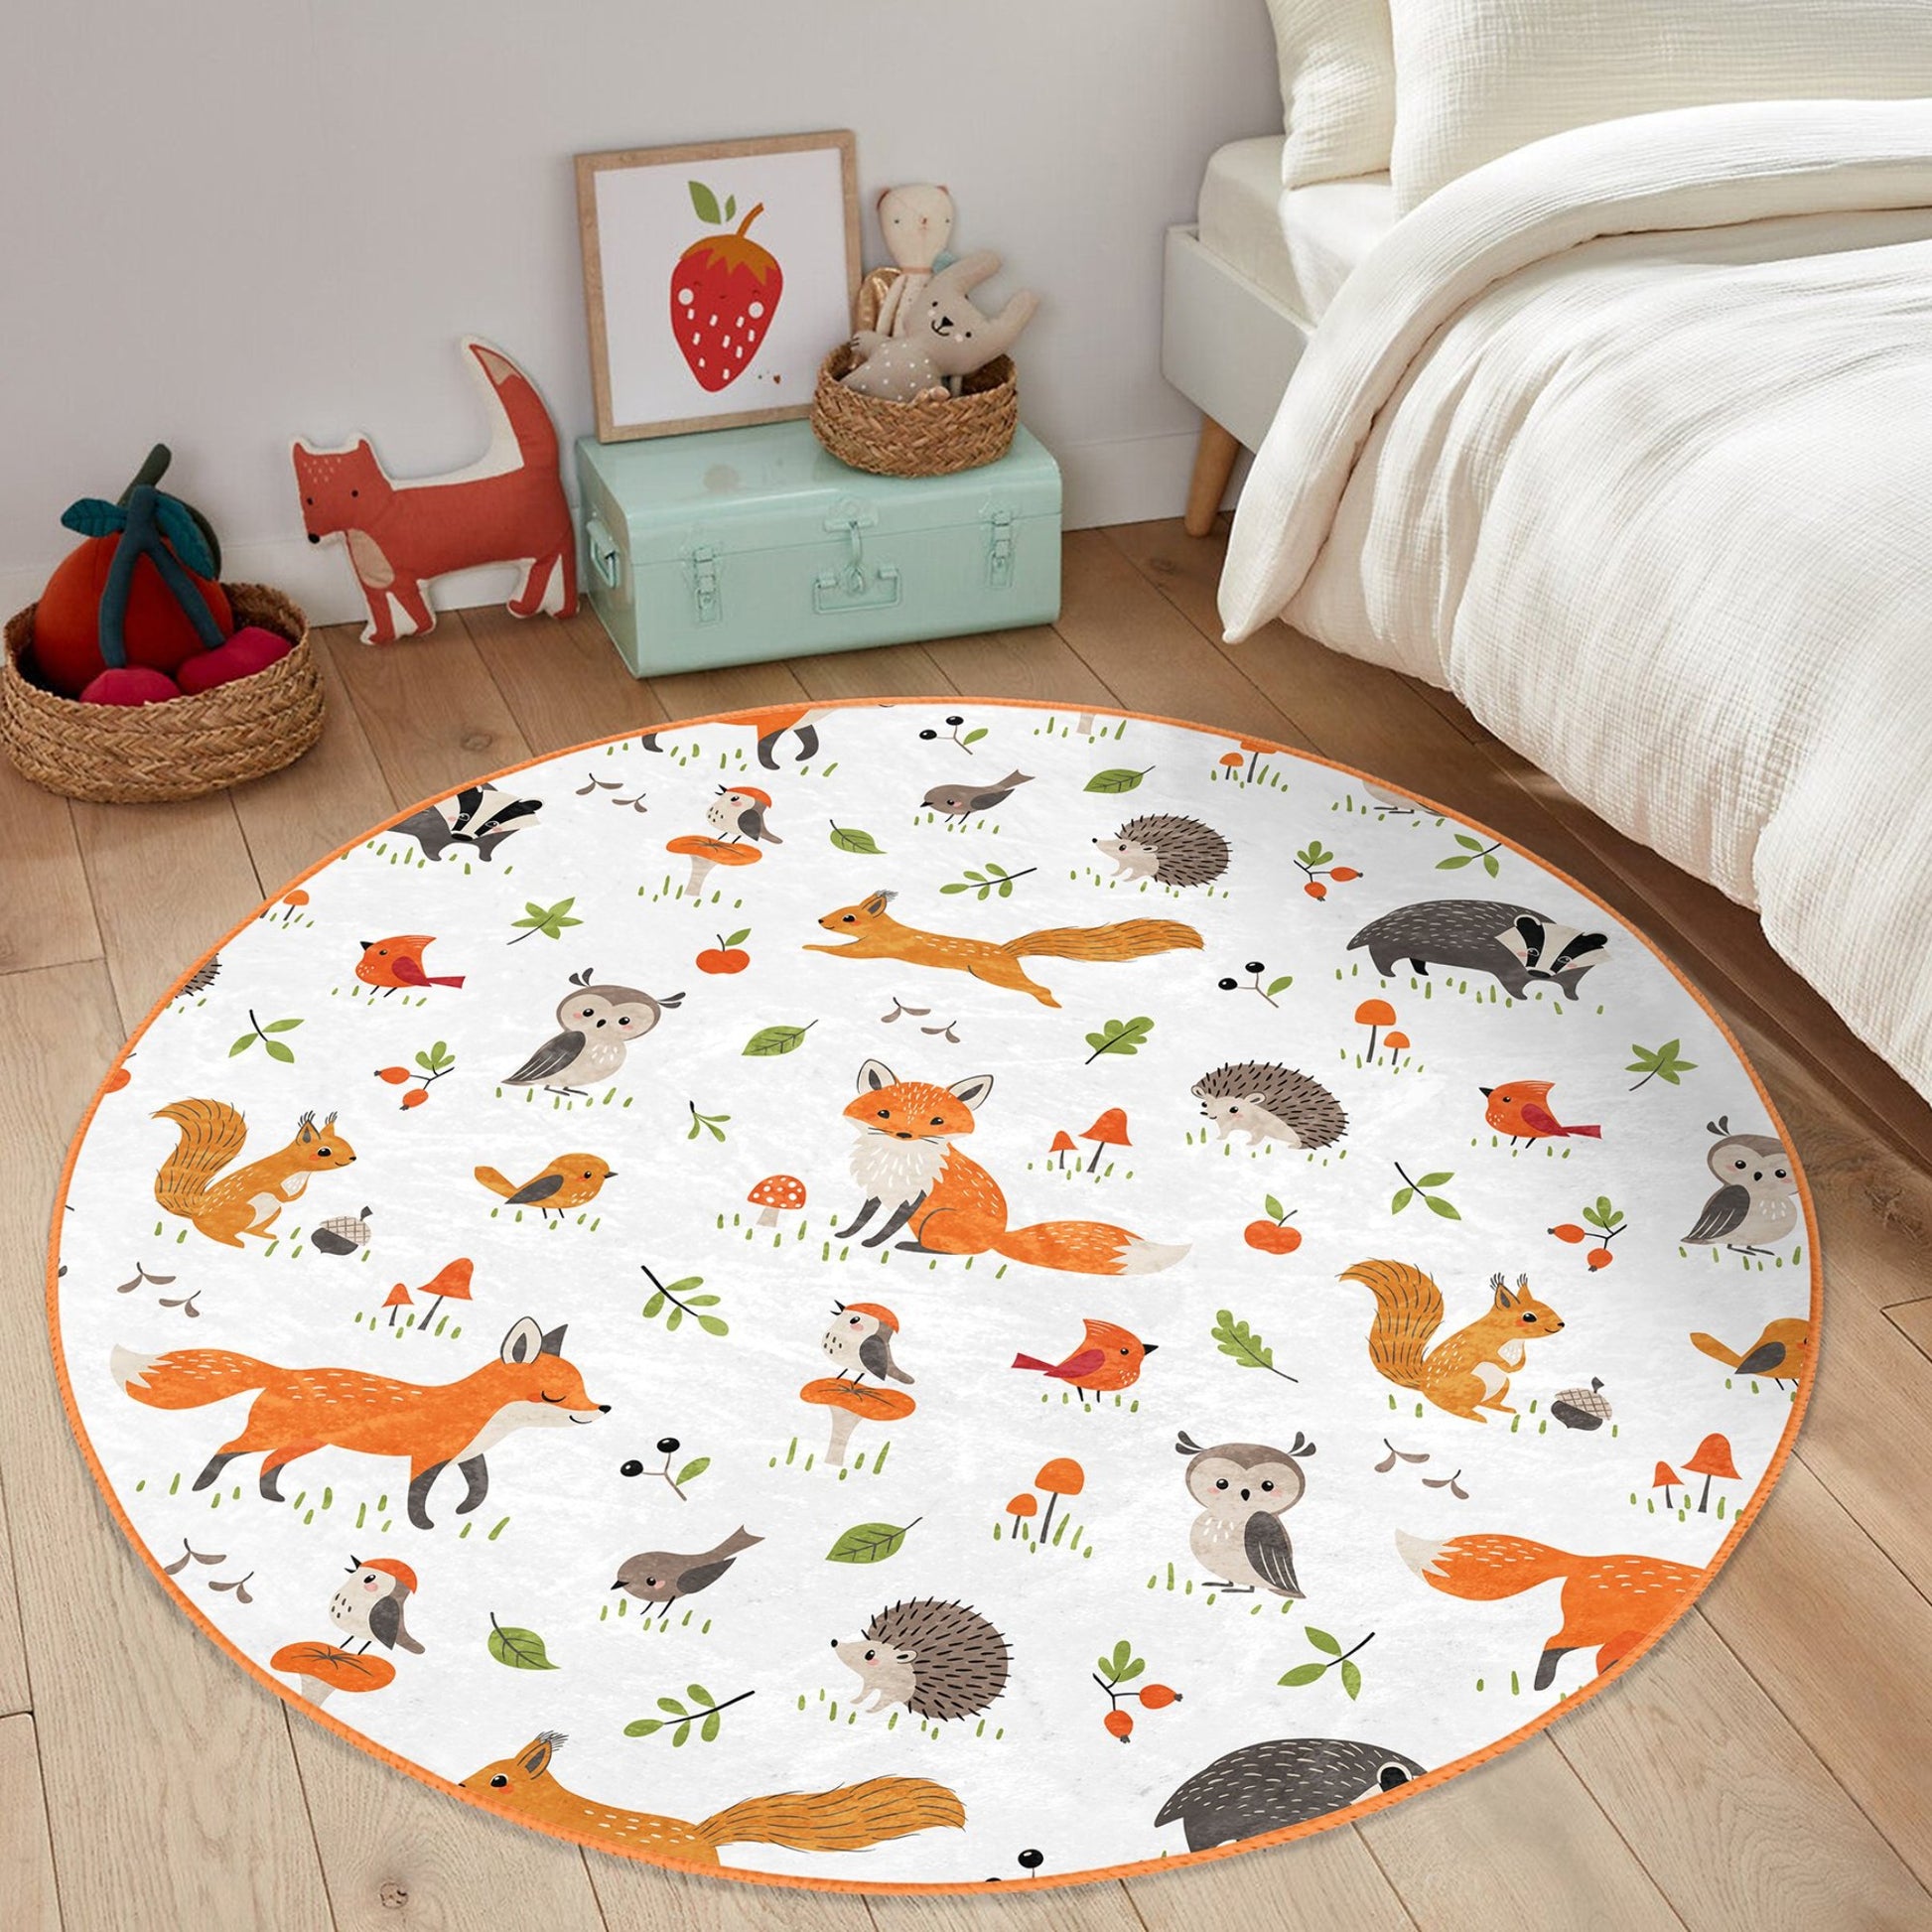 Rug with Playful Fox in an Enchanted Forest Illustration